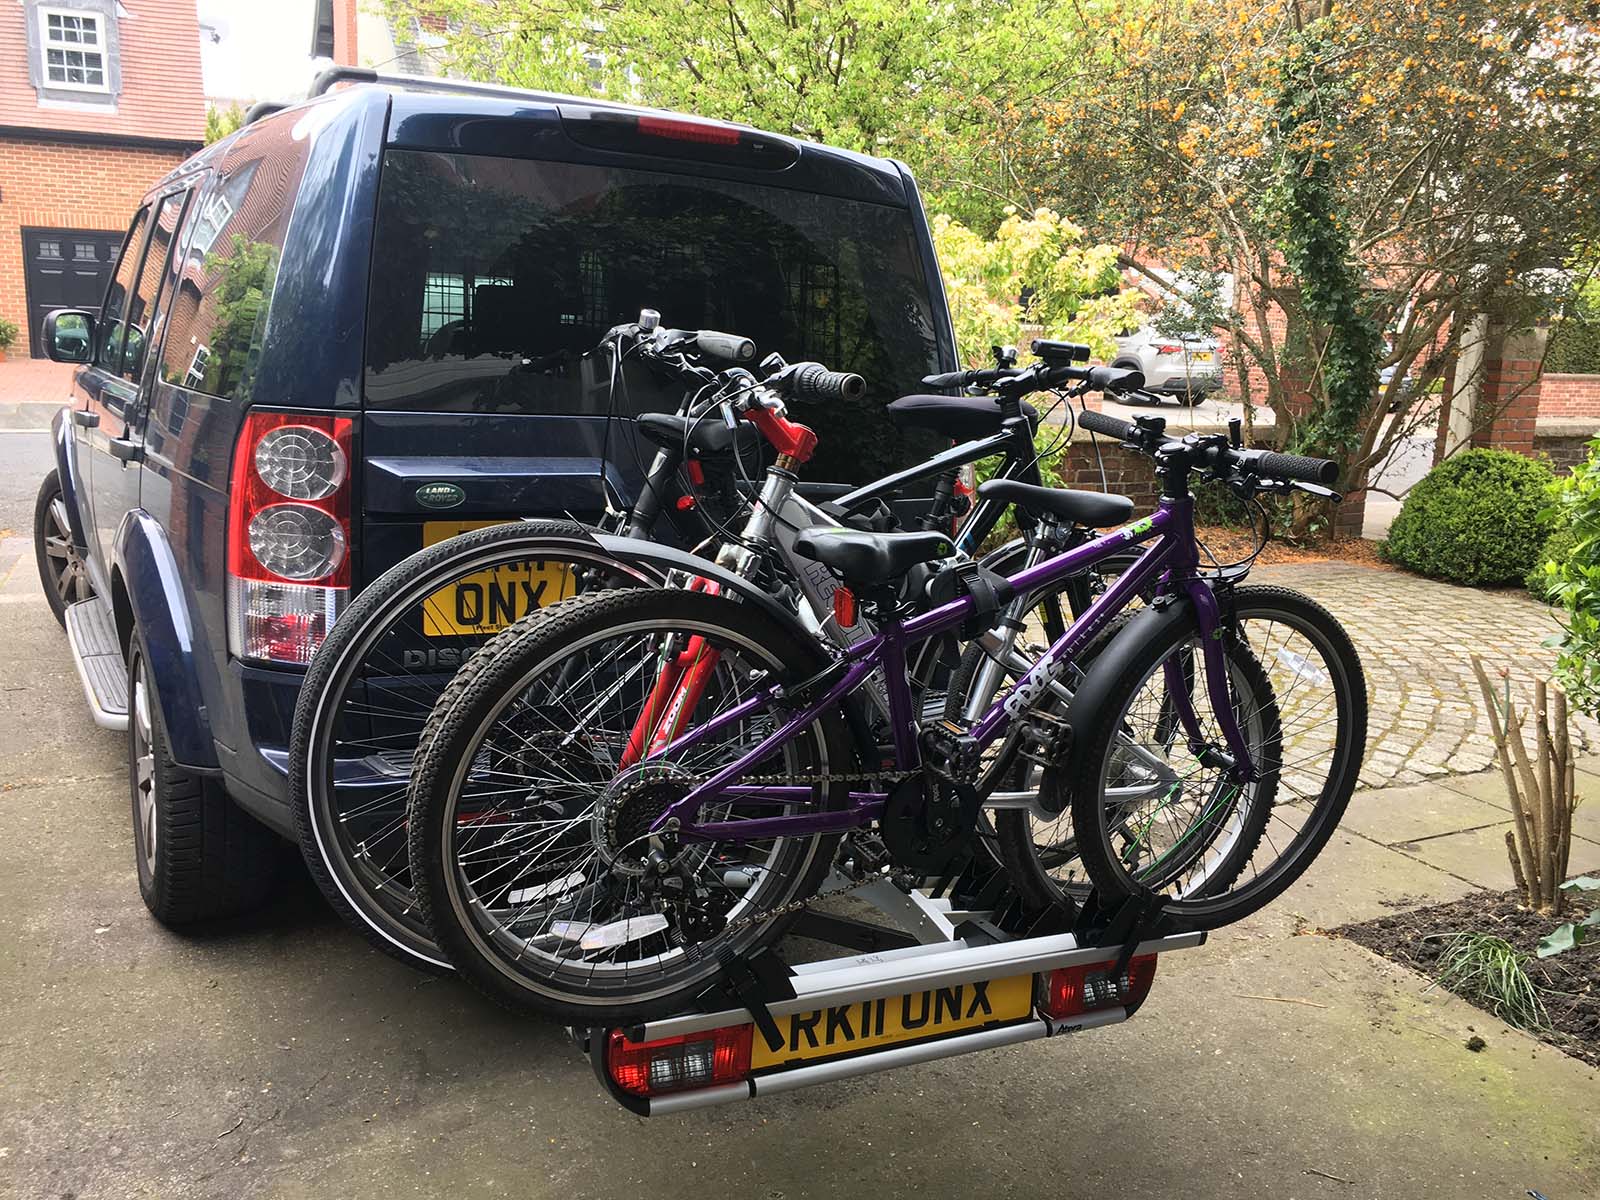 tow bar extension for bike rack